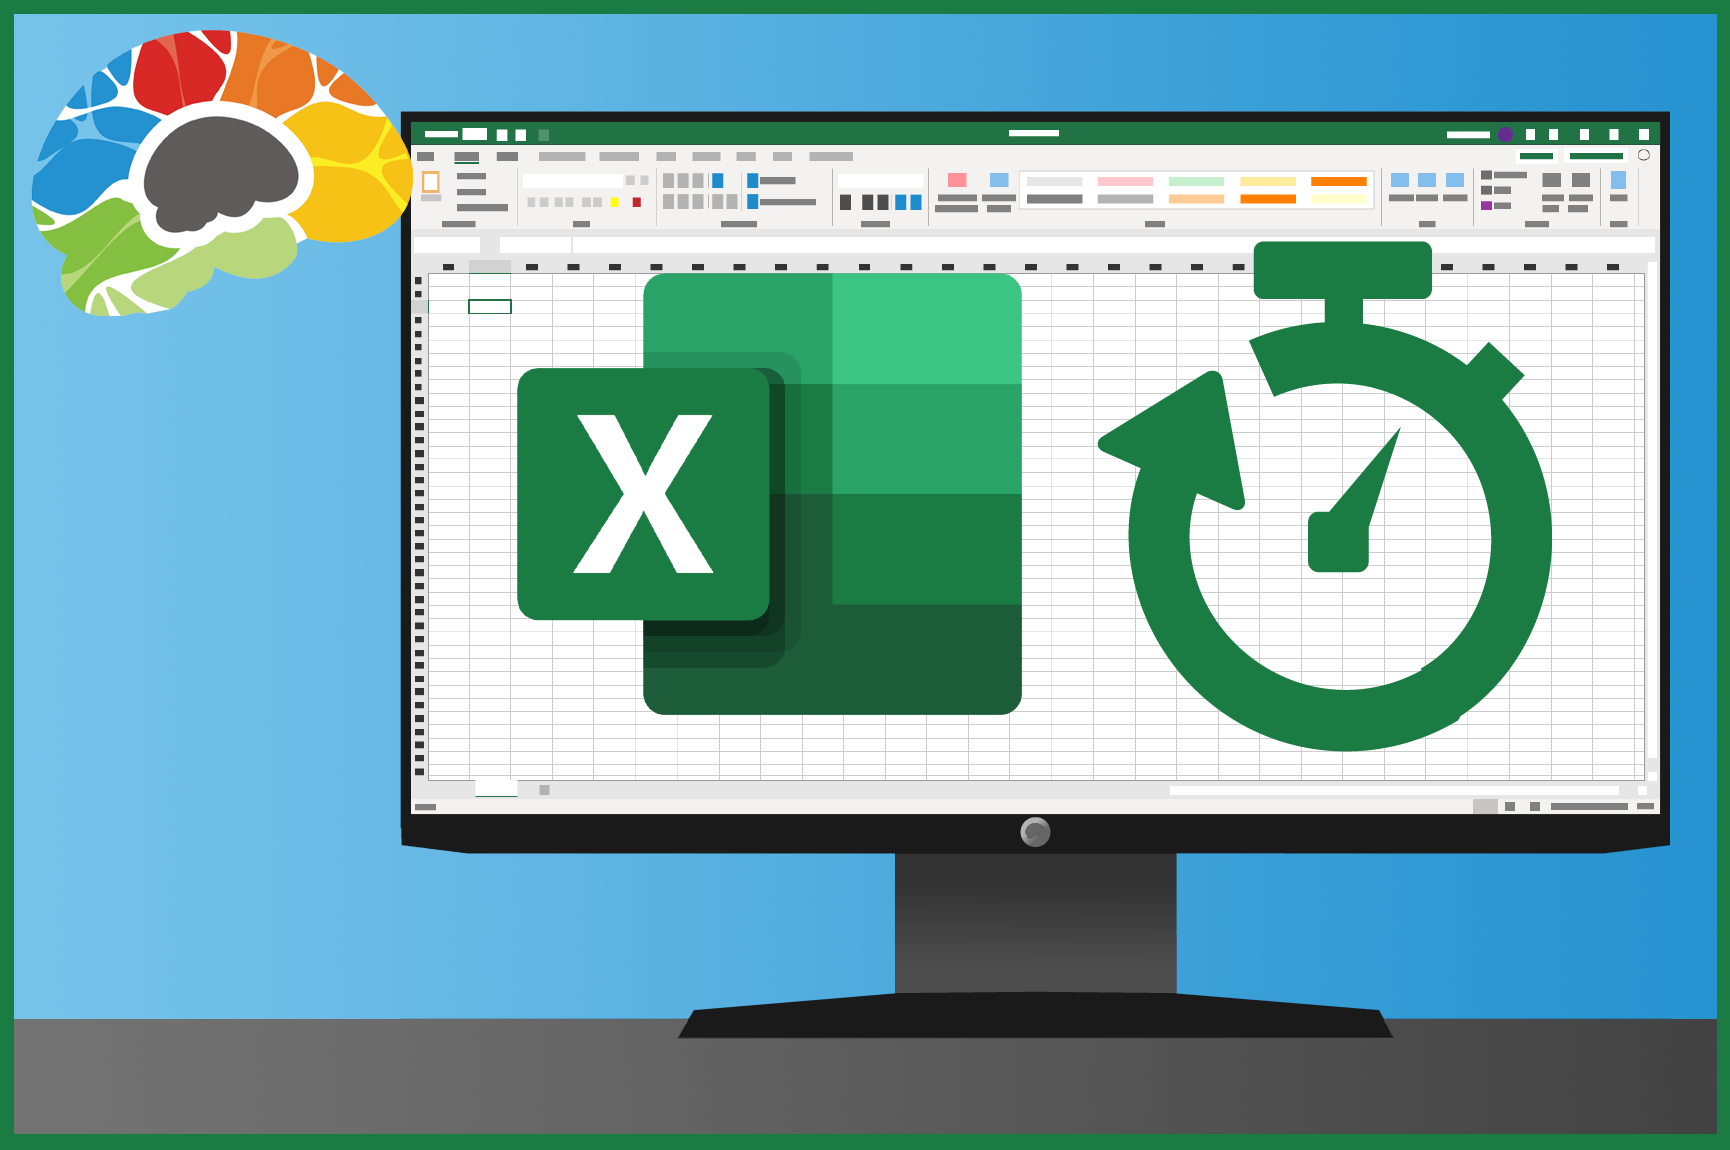 Excel in 30 Minutes: Getting Started (Basics 1 of 10)